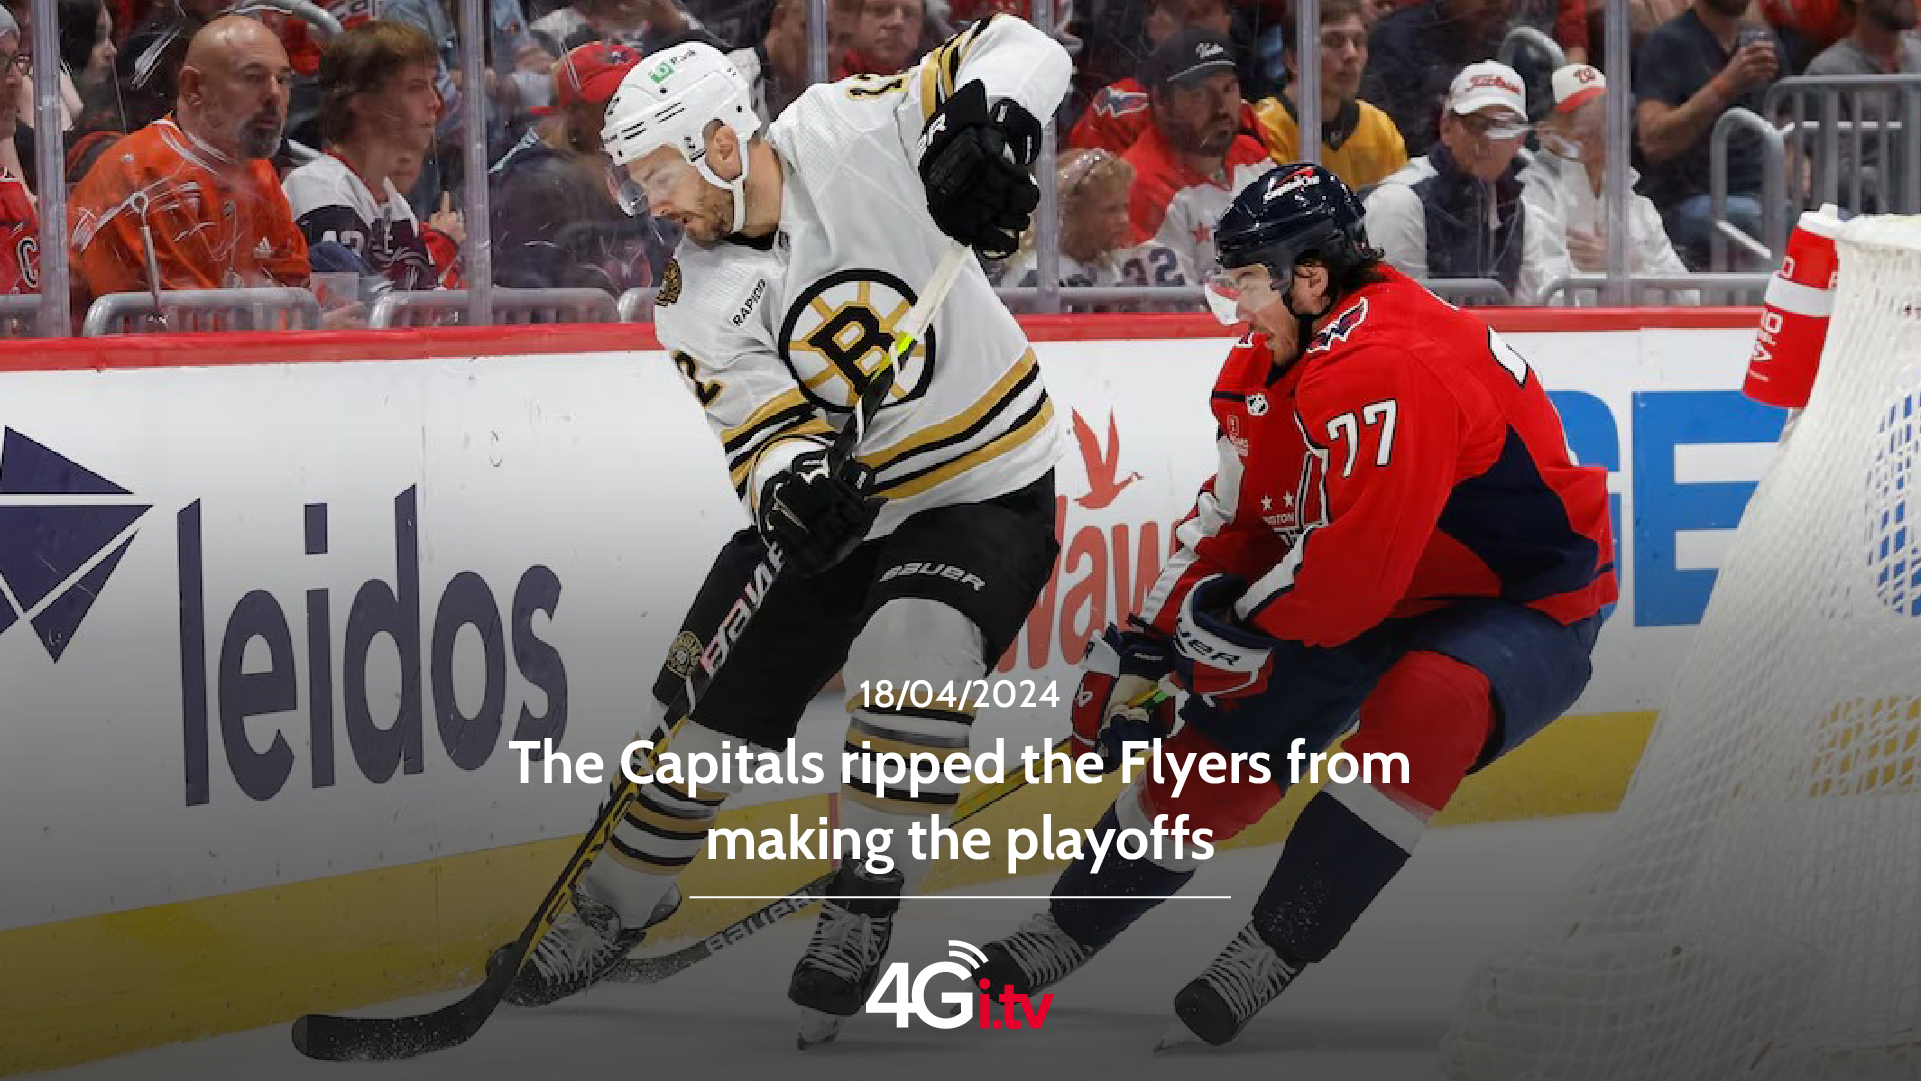 Lee más sobre el artículo The Capitals ripped the Flyers from making the playoffs 